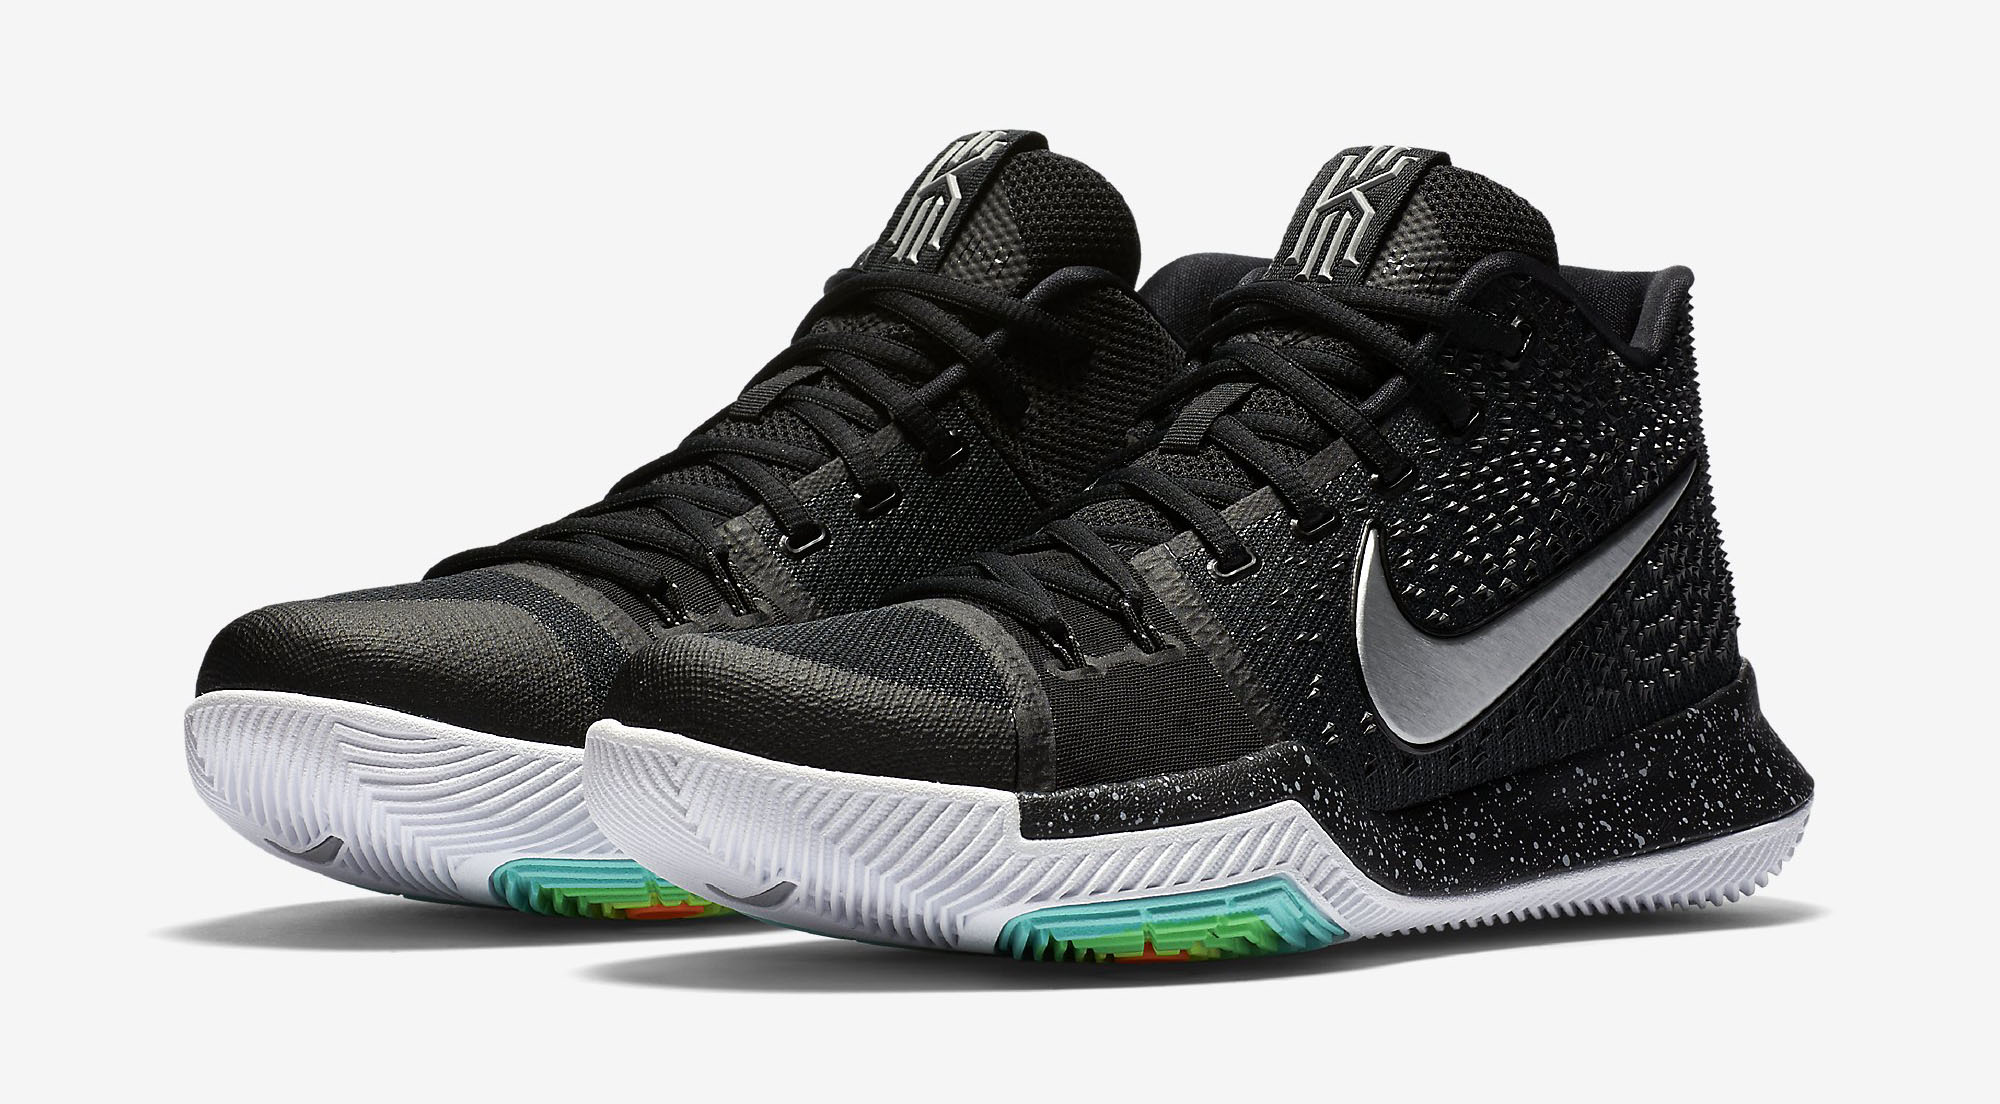 kyrie 3 traction